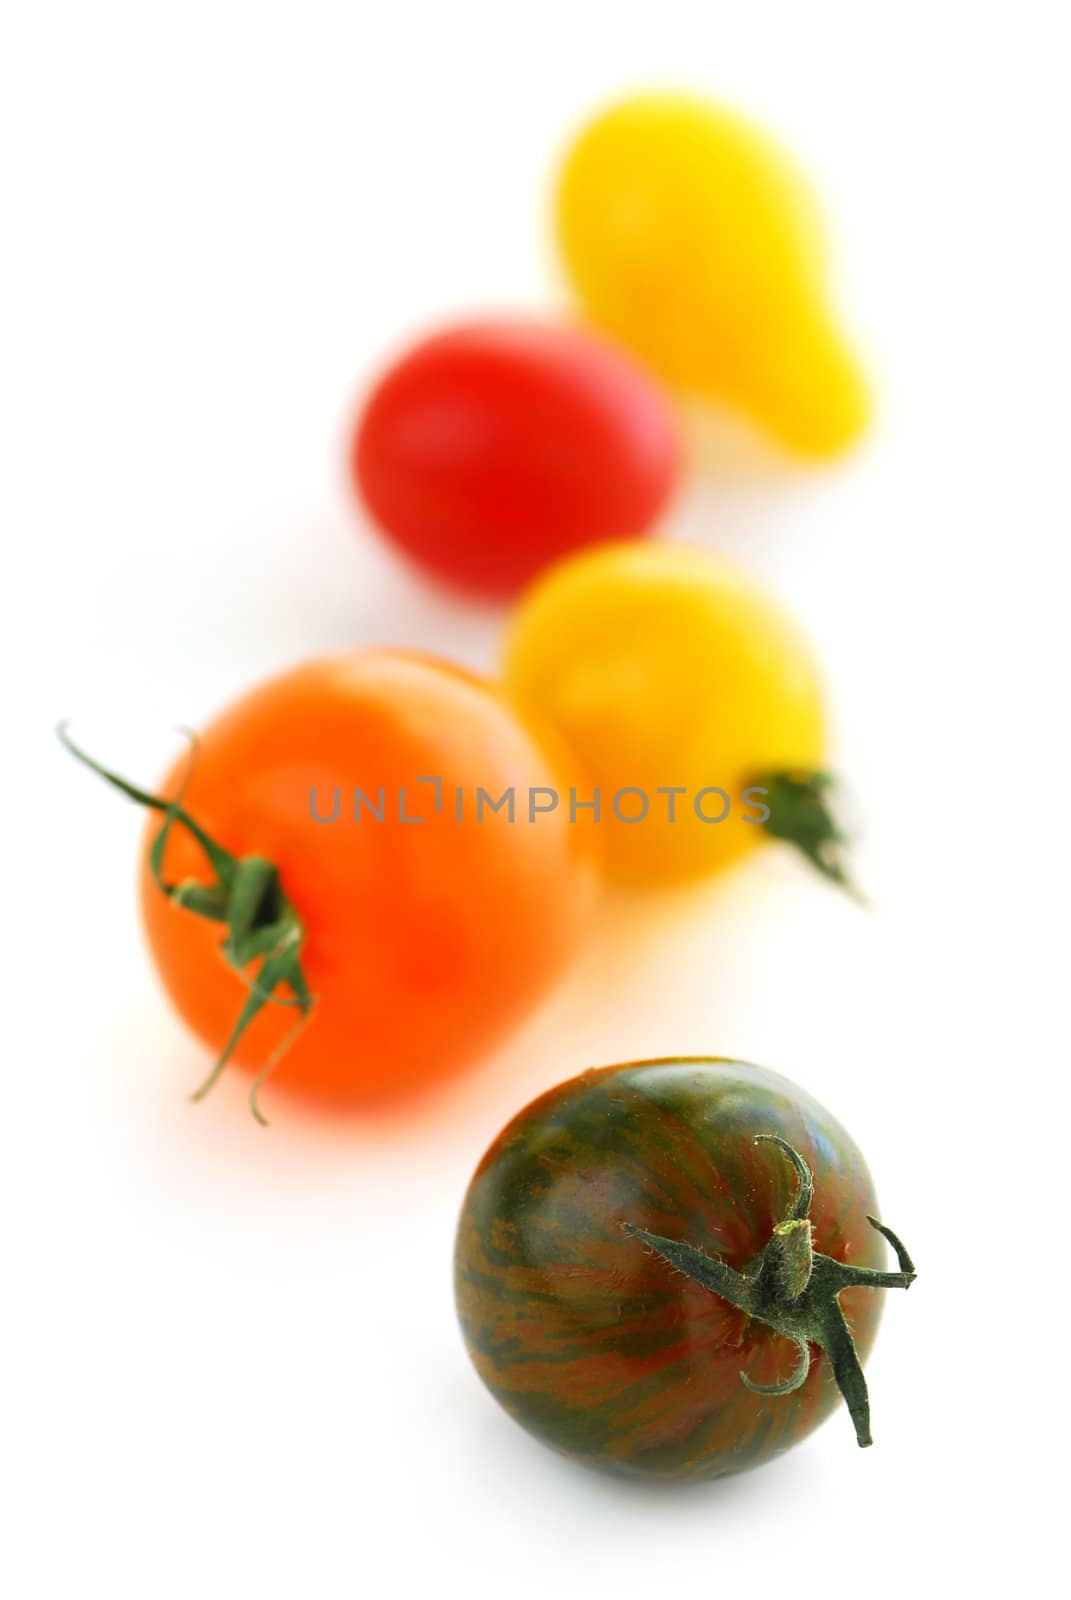 Multicolored cherry tomatoes isolated on white background